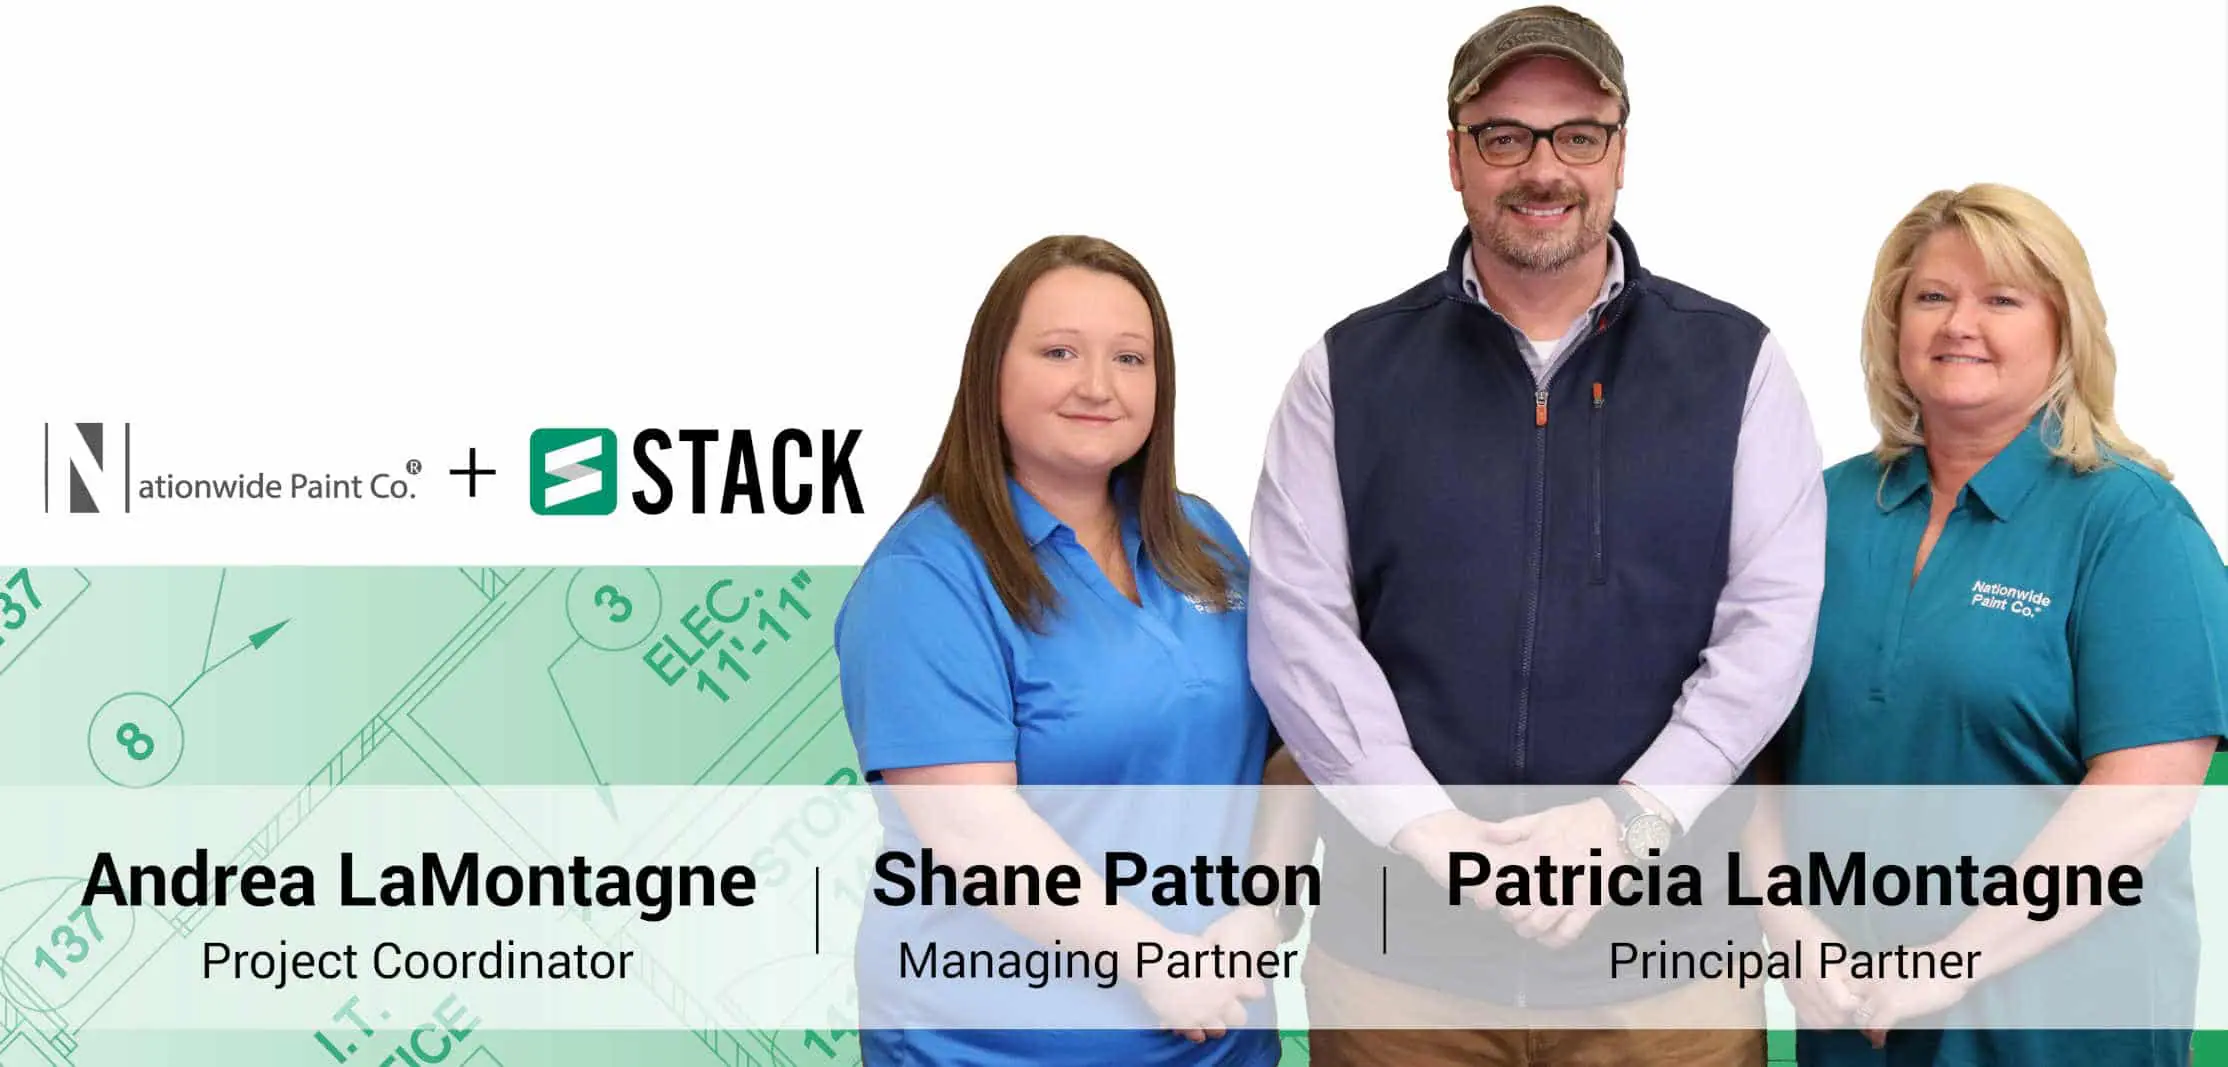 Nationwide Paint Company + STACK